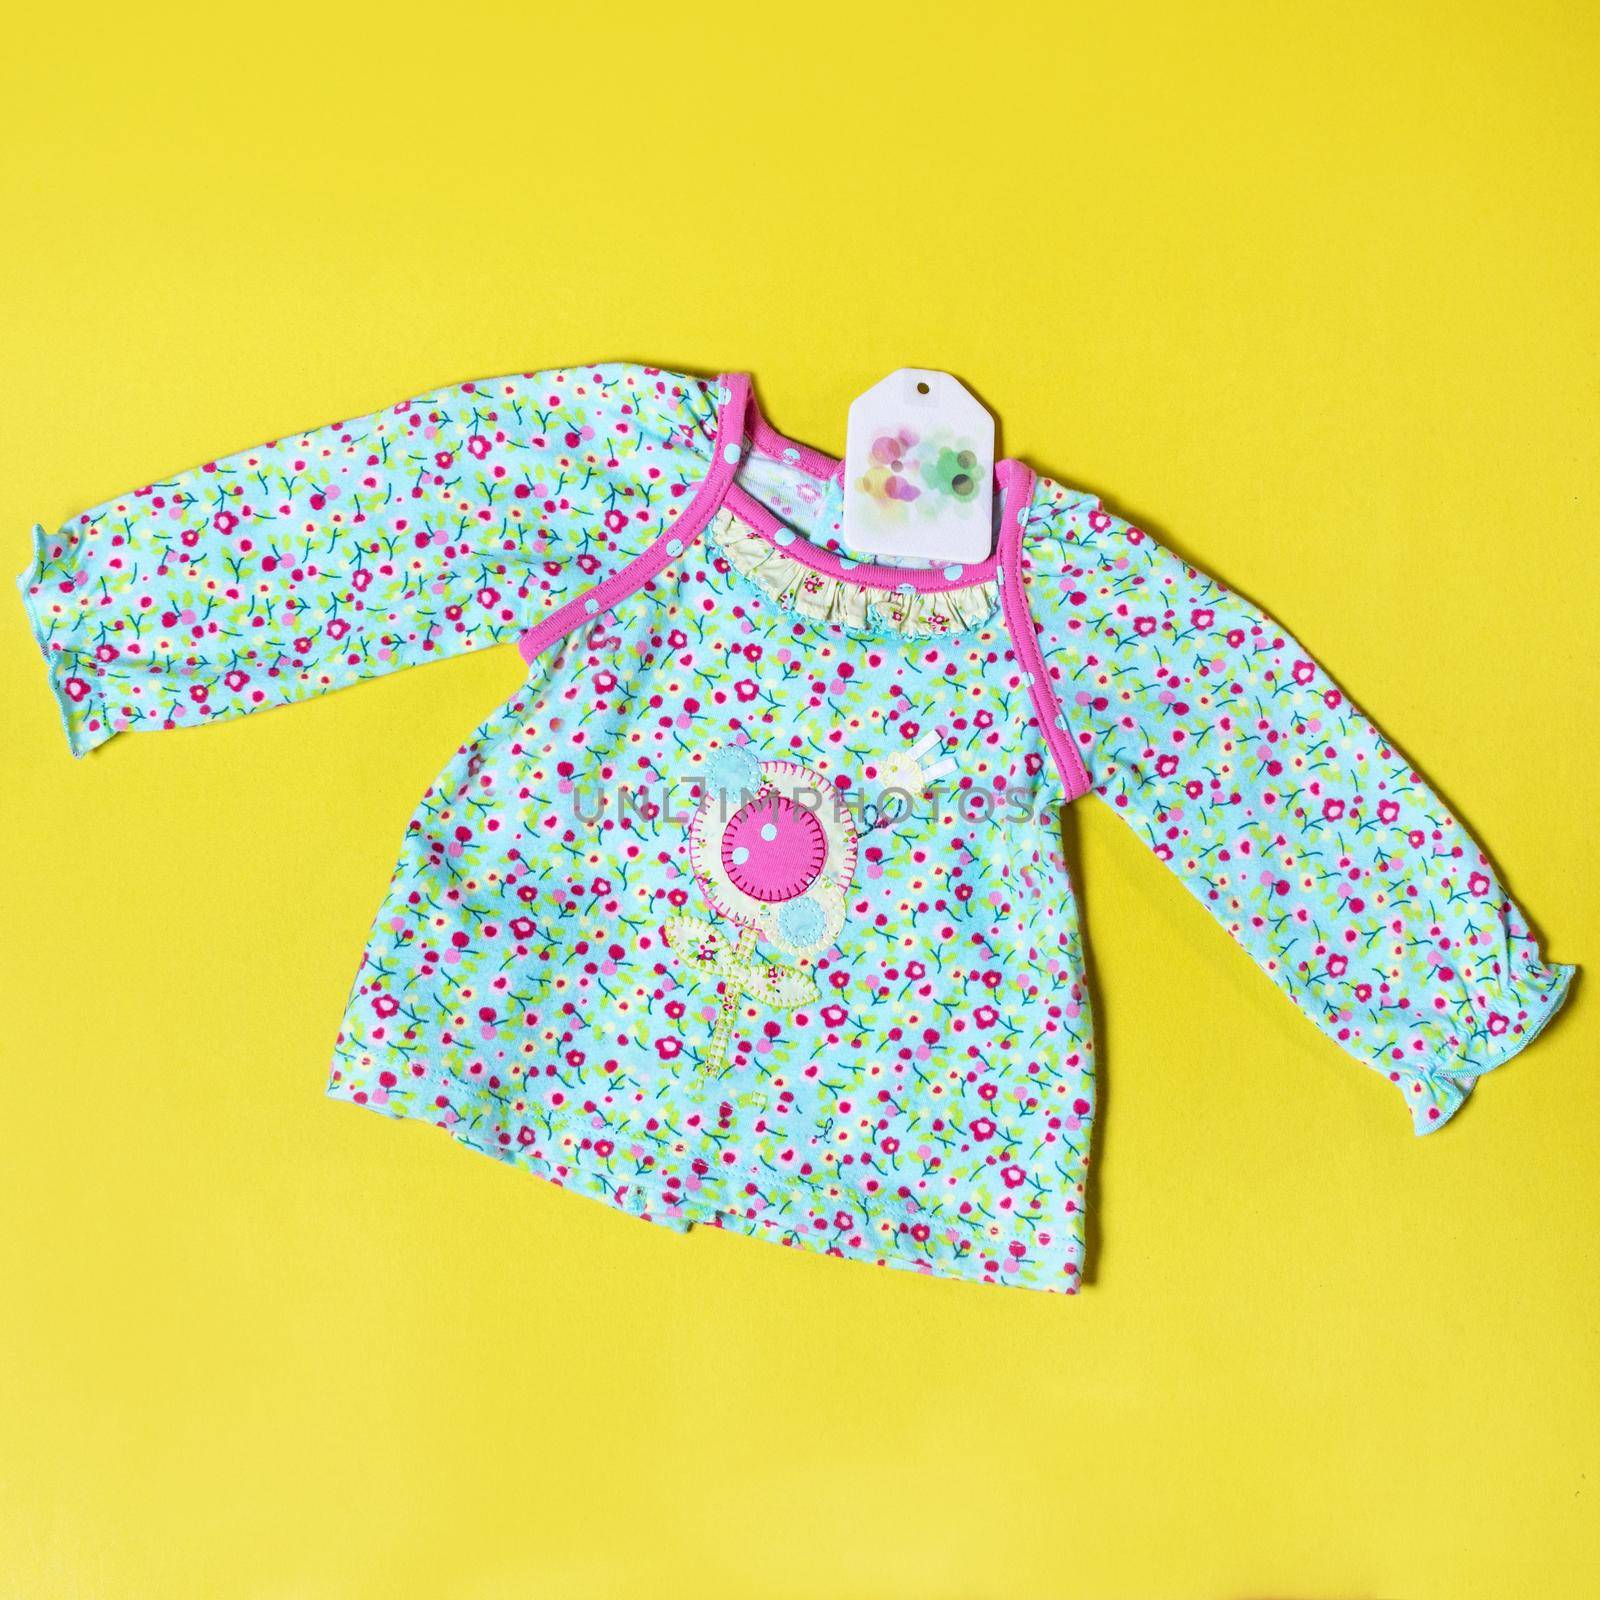 Baby girl clothes and toy stuff, baby fashion concept